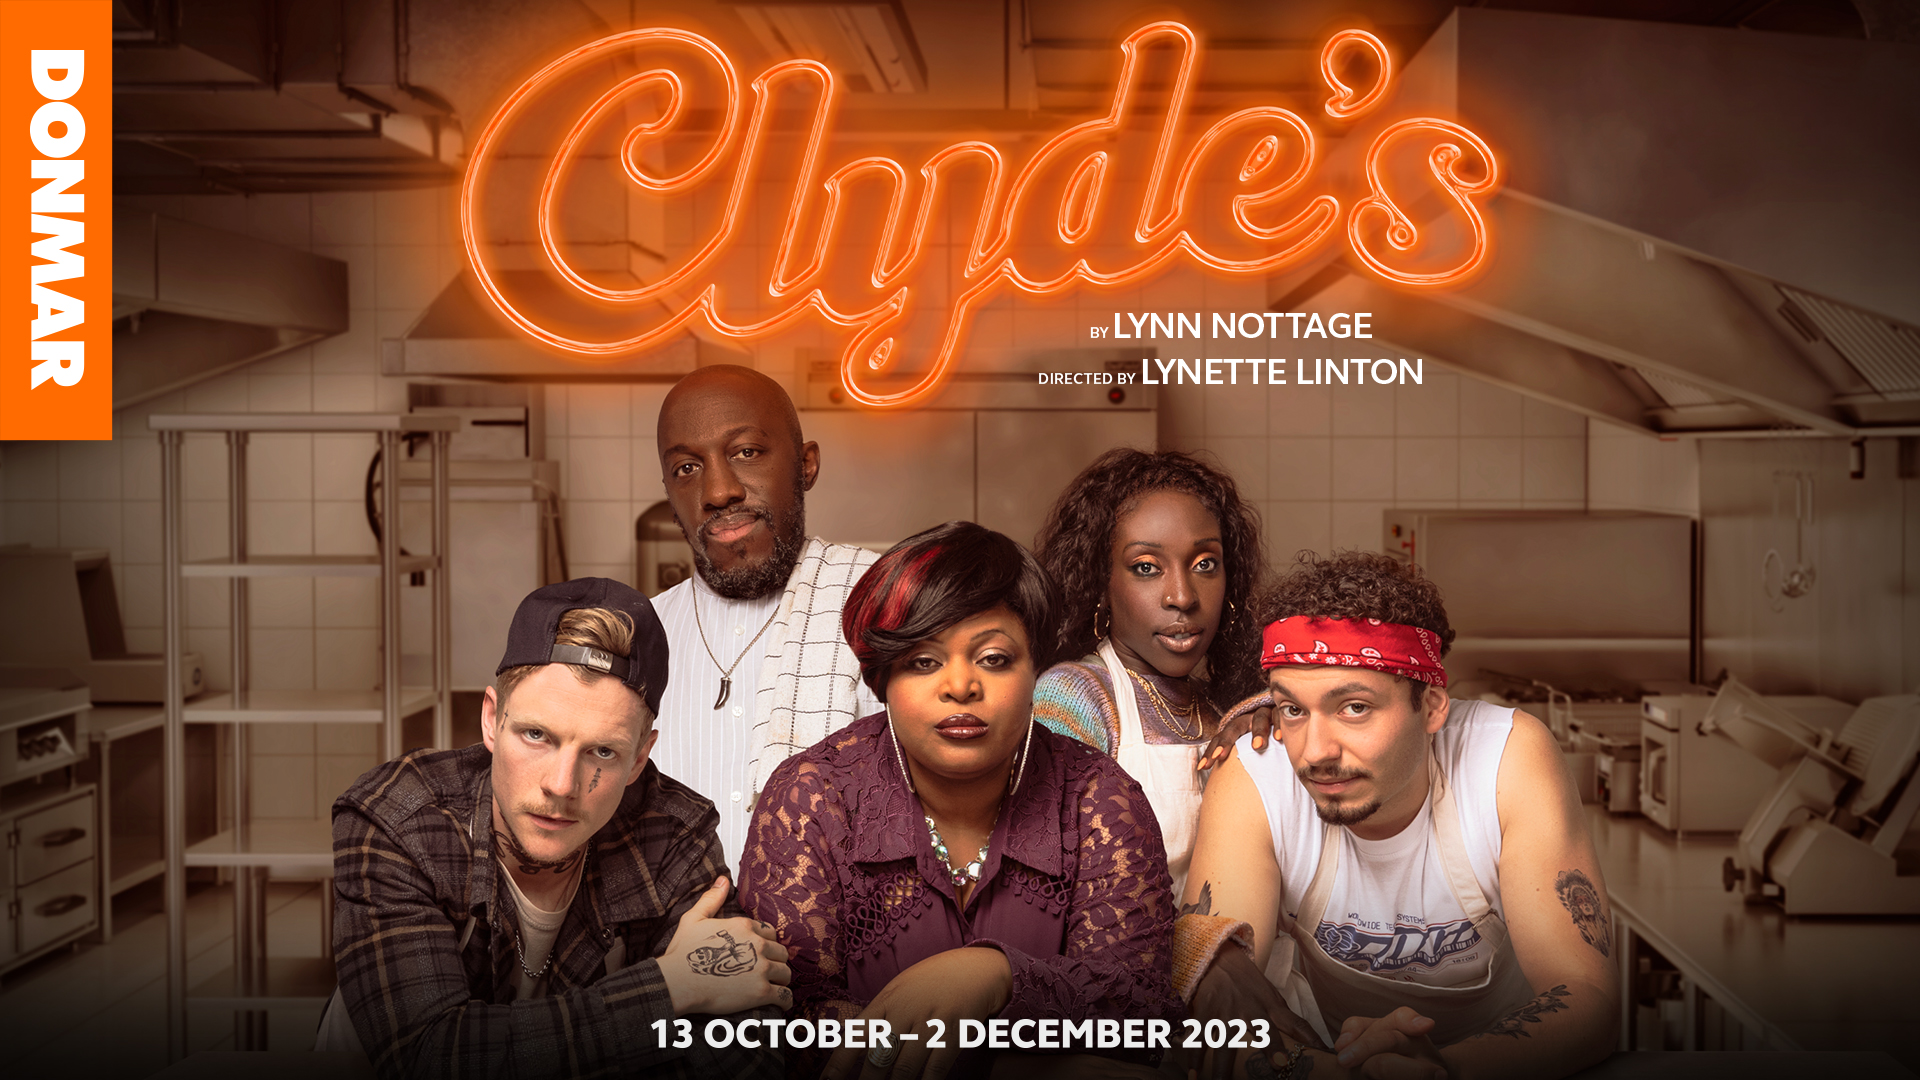 Clyde's by Lynn Nottage